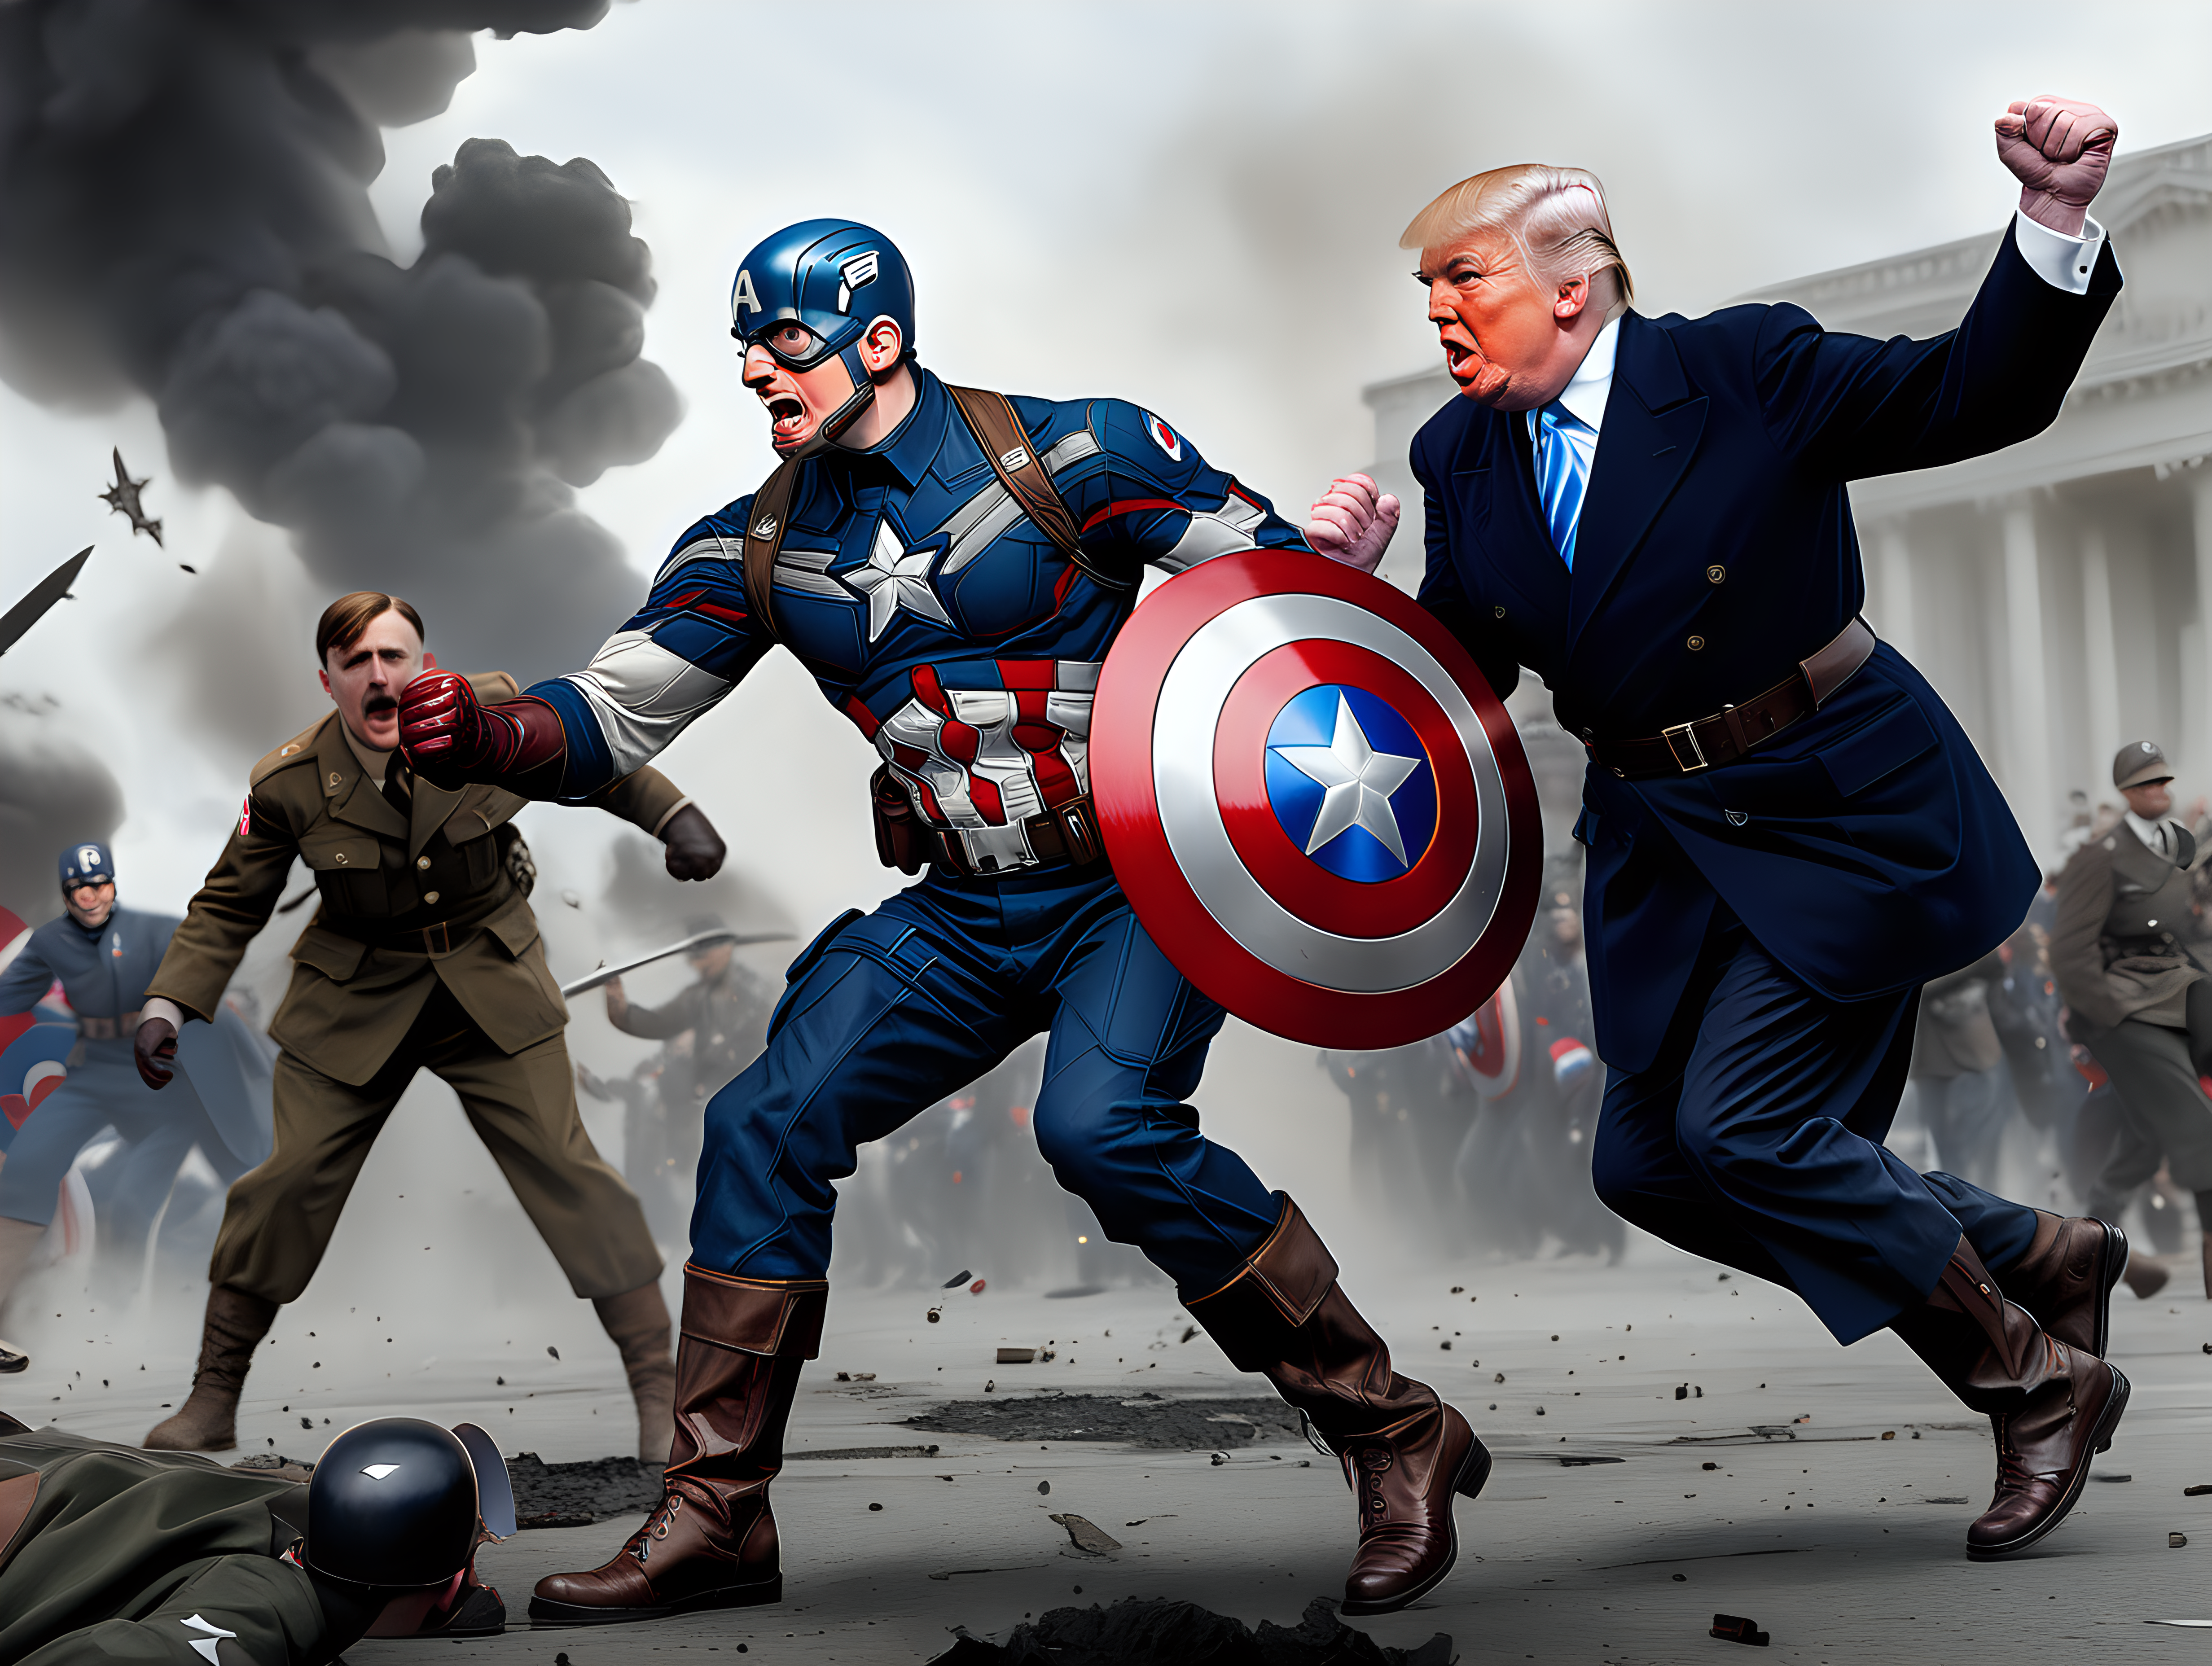 Captain America fighting Hitler and Donald Trump